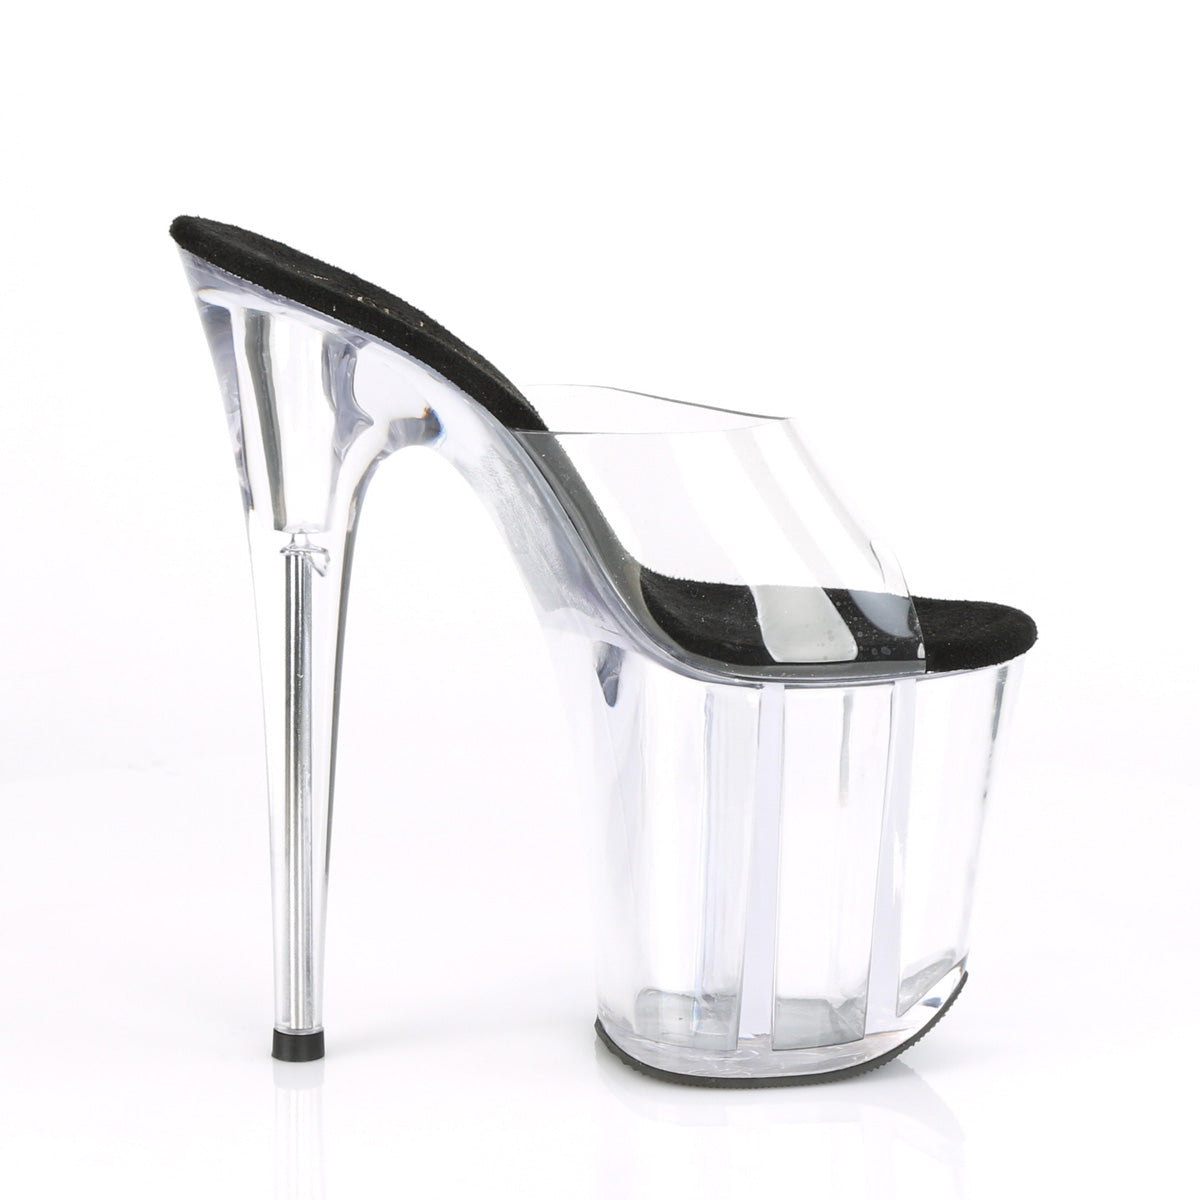 FLAMINGO-801 8" Heel Clear and Black Pole Dancing -Pleaser- Sexy Shoes Fetish Heels